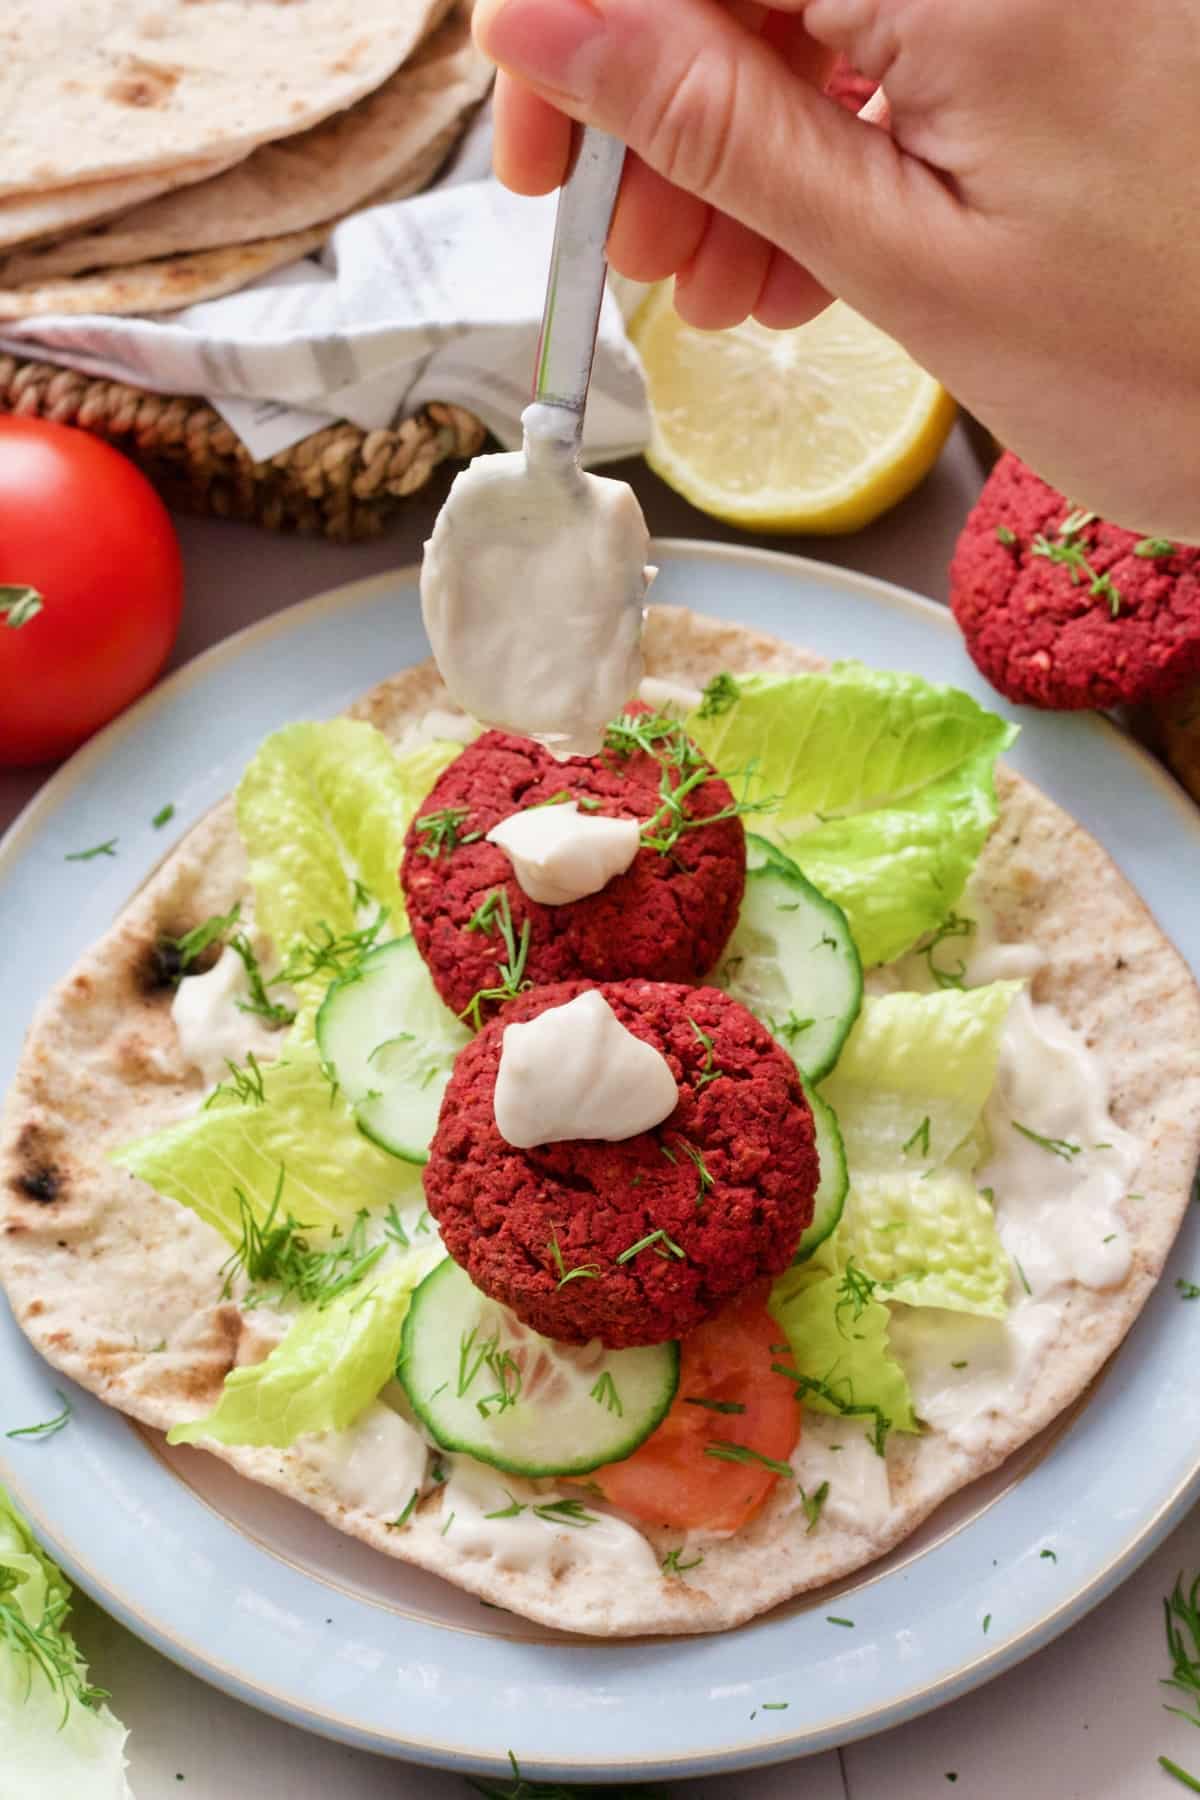 Mayo being dolloped onto falafel in a flatbread.